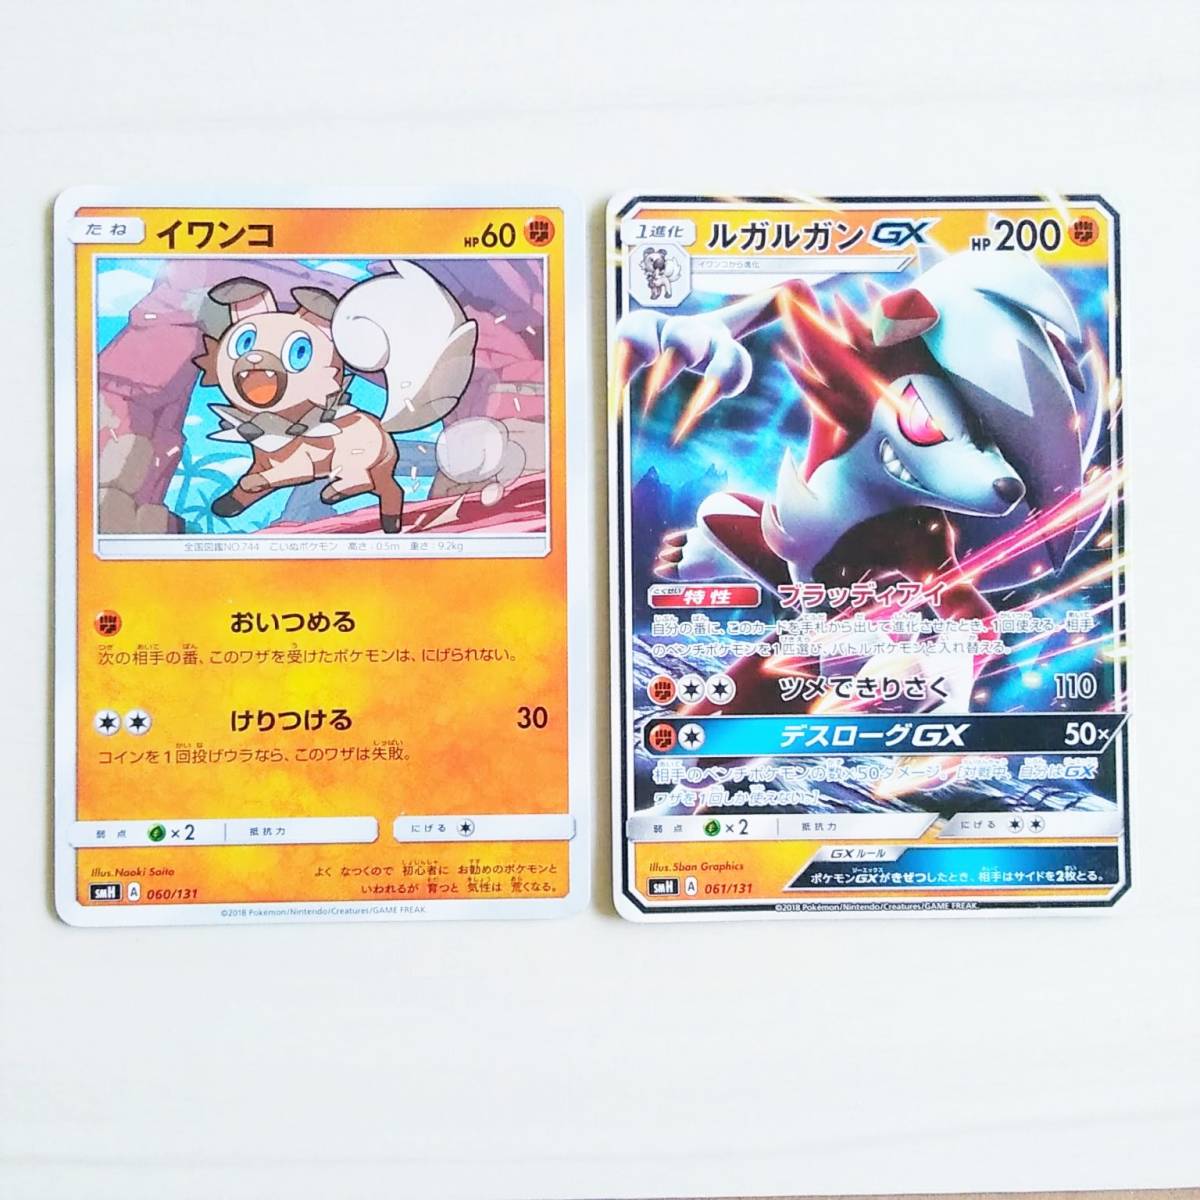 Used ポケモンカード イワンコ 進化セット ルガルガン 2枚セット Product Details Yahoo Auctions Japan Proxy Bidding And Shopping Service From Japan